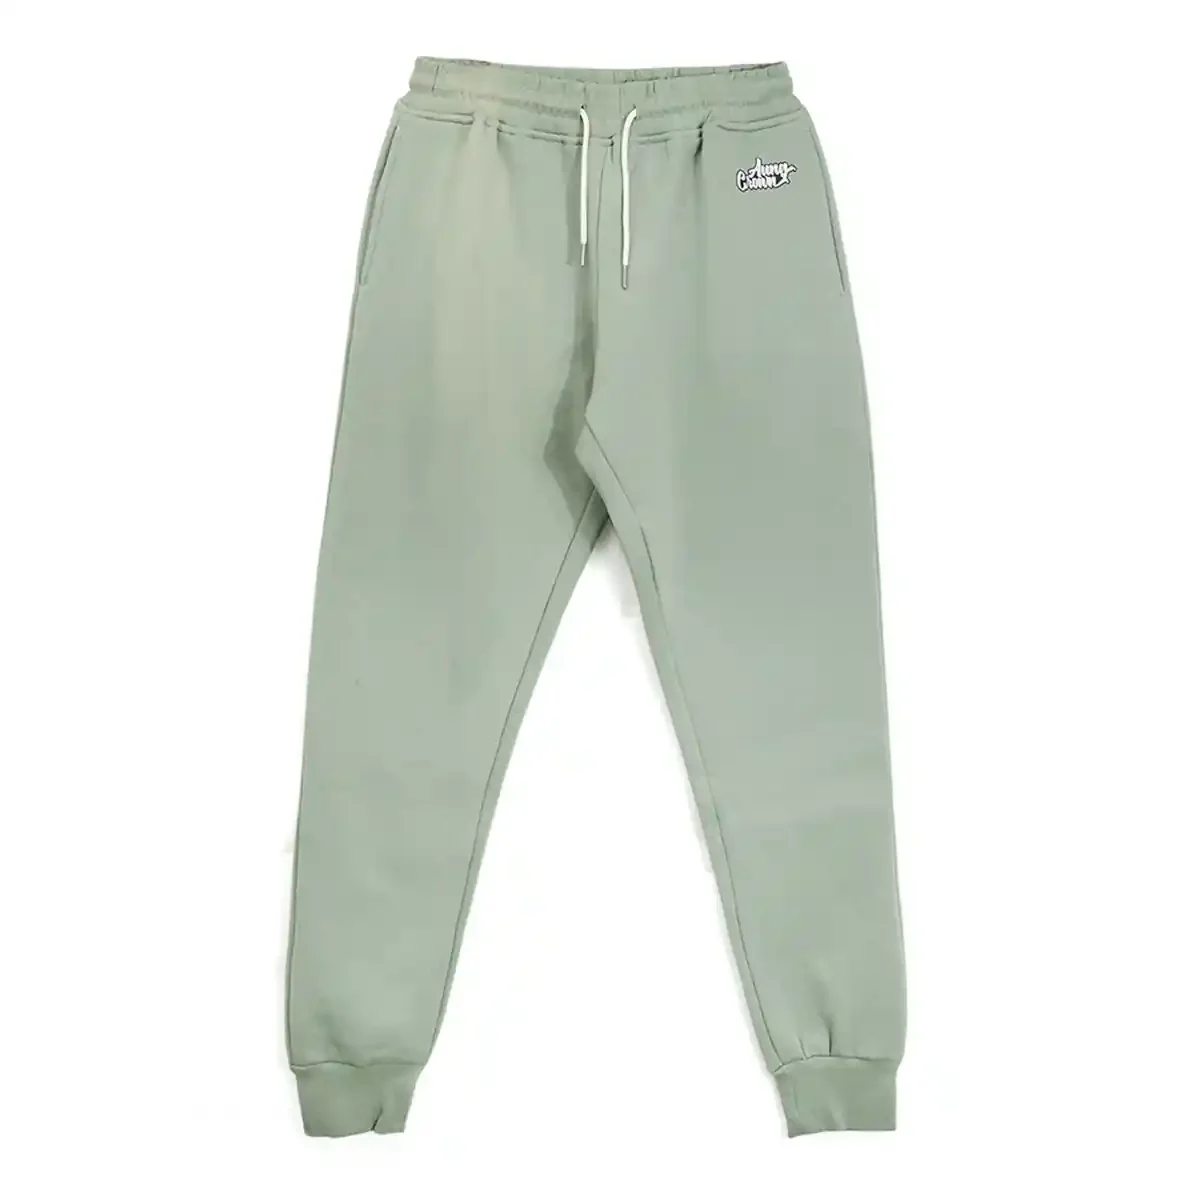 light-green-pants-with-heat-transfer-letters-SFZ-210420-6